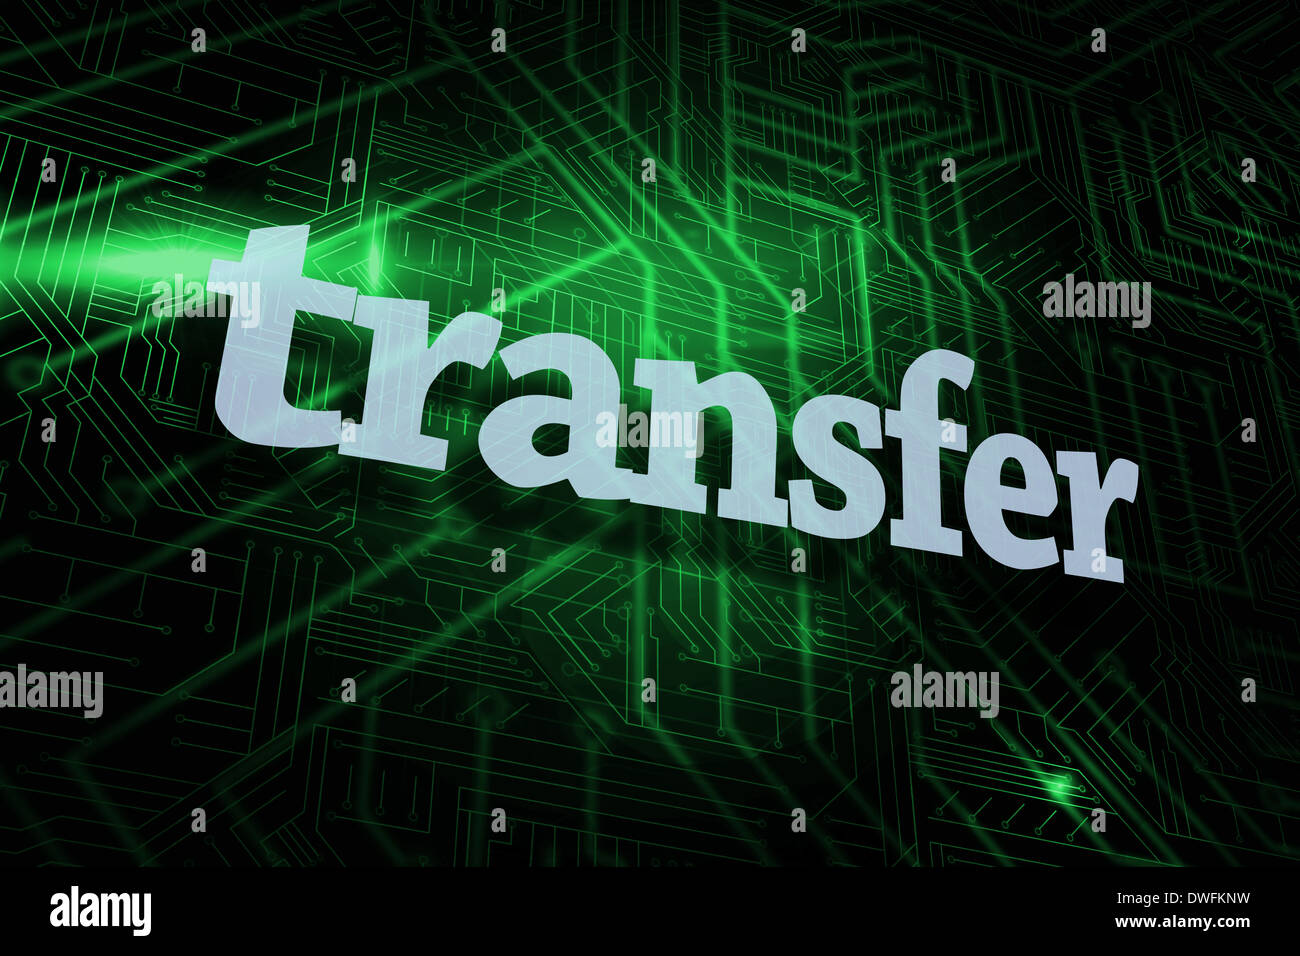 Transfer against green and black circuit board Stock Photo